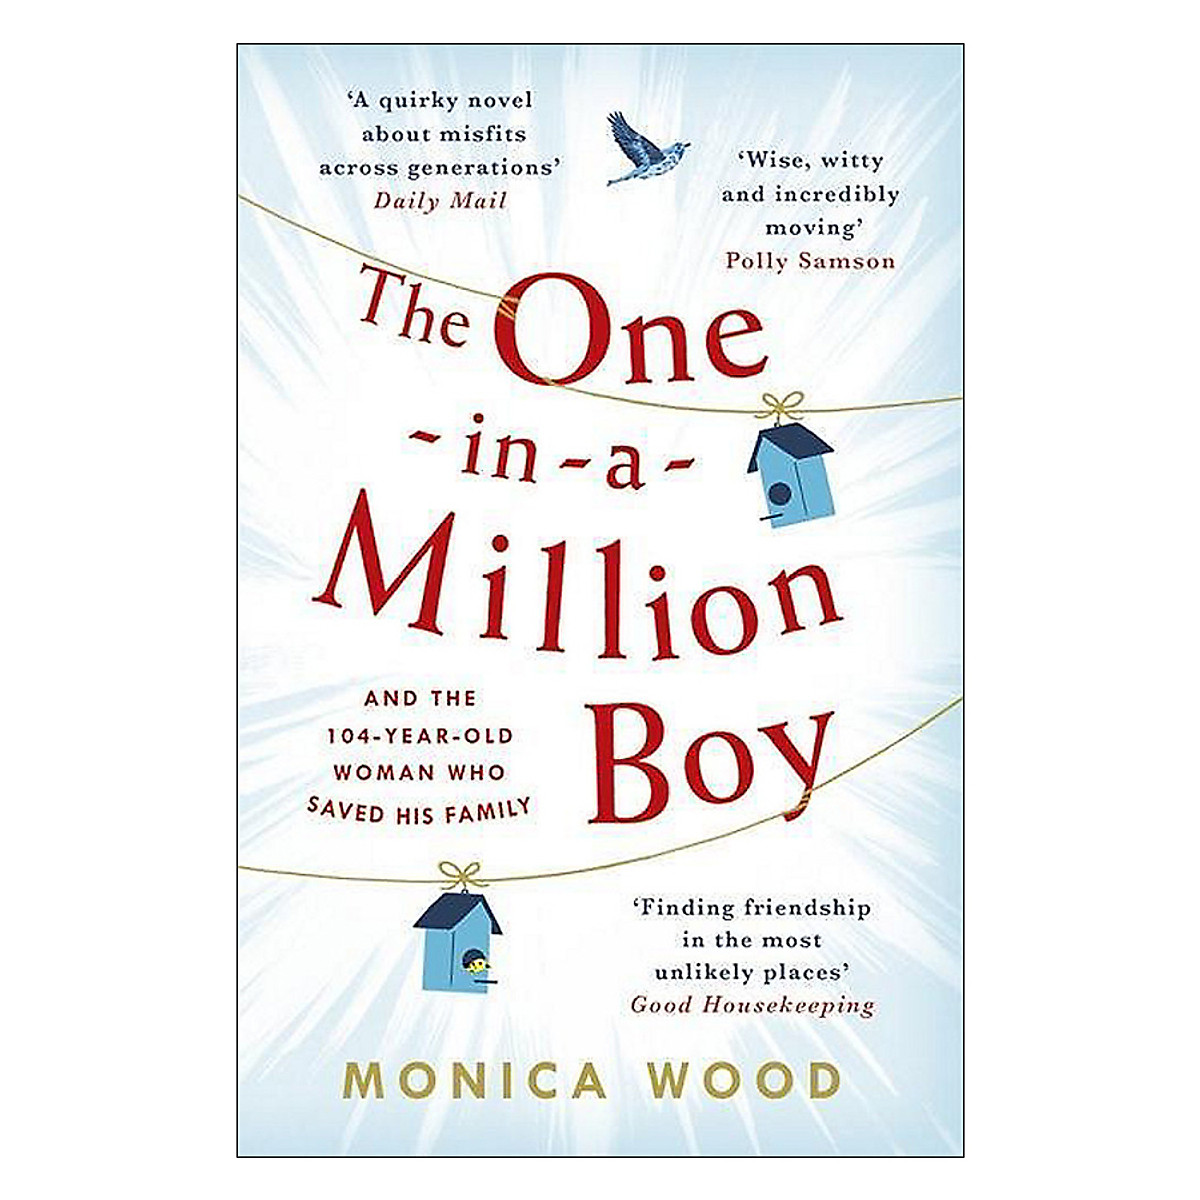 The One-in-a-Million Boy: The touching novel of a 104-year-old woman's friendship with a boy you'll never forget